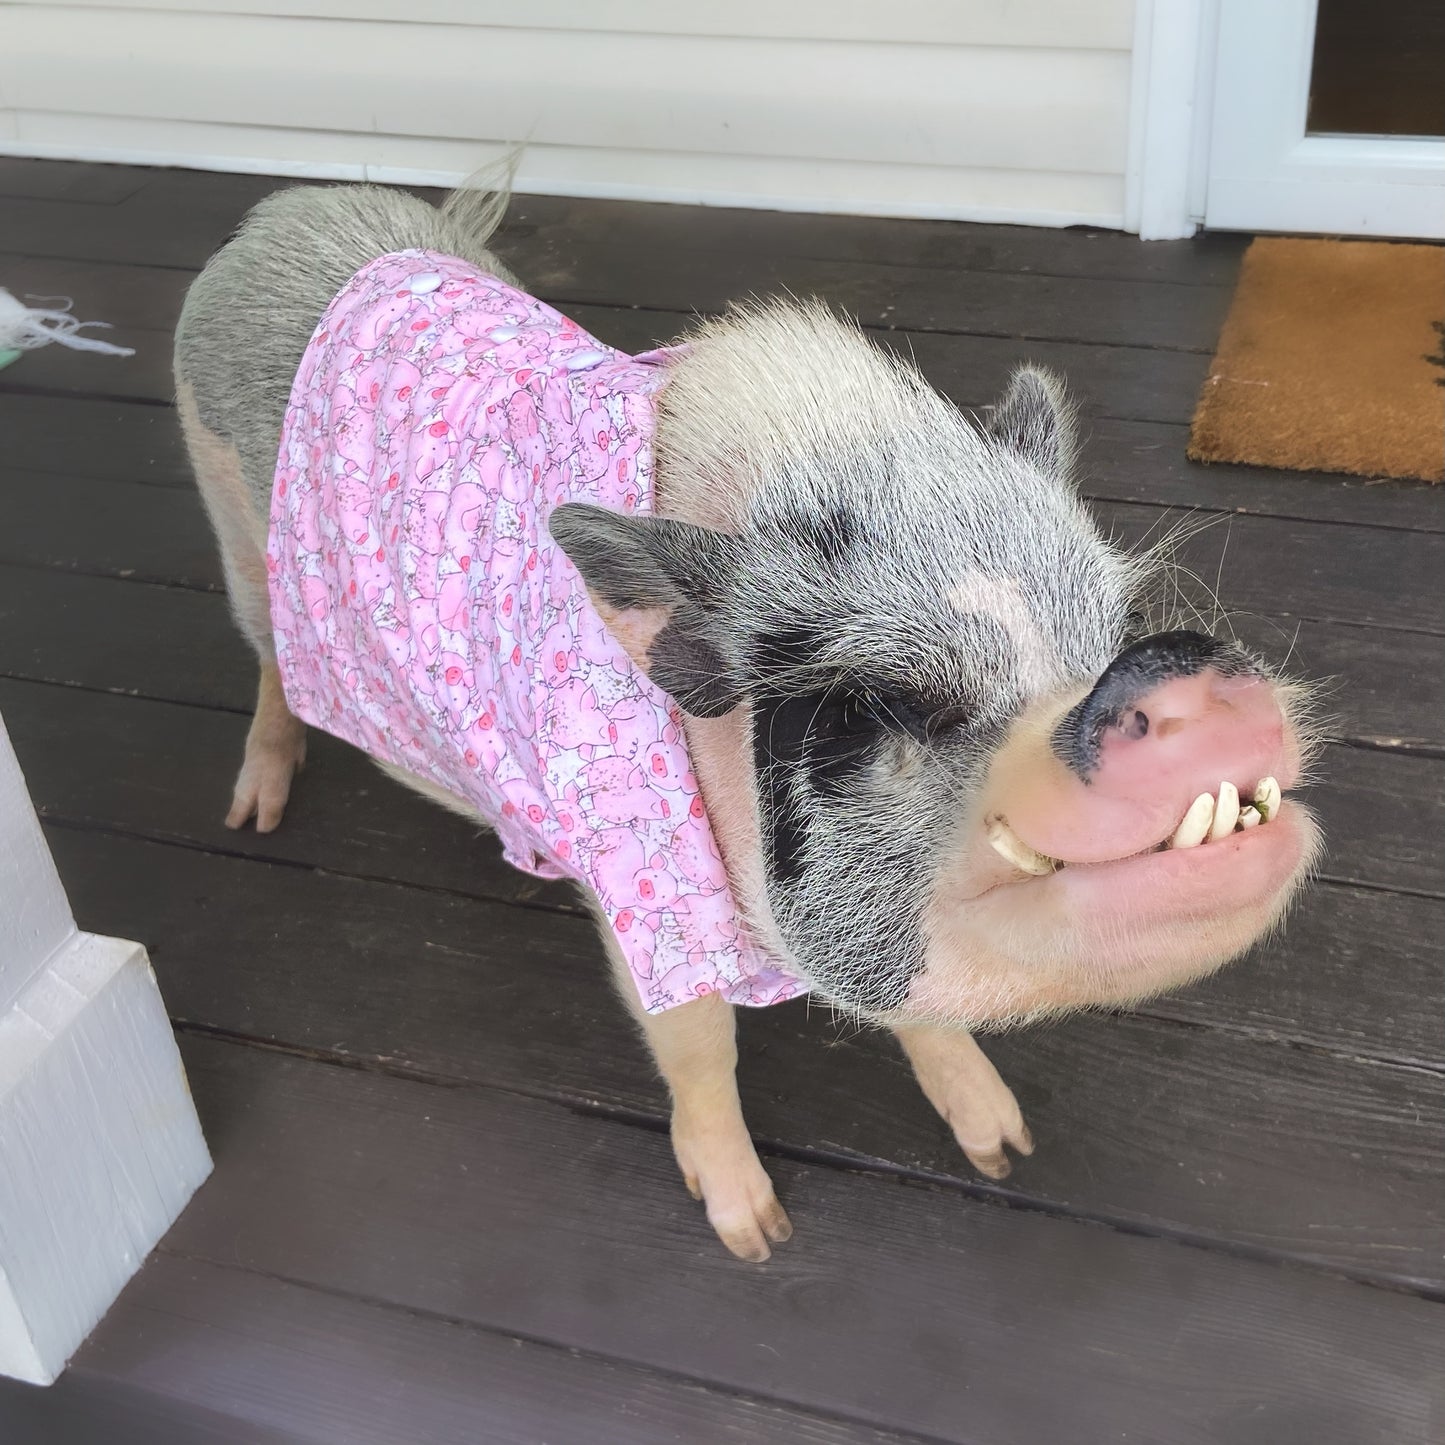 Piggy Print Pig Shirt or Dress for Spring, Summer and Fall! Muddy Pigs Mini Pig Clothes, Clothing for Potbelly Pigs, Hogs, & Boars